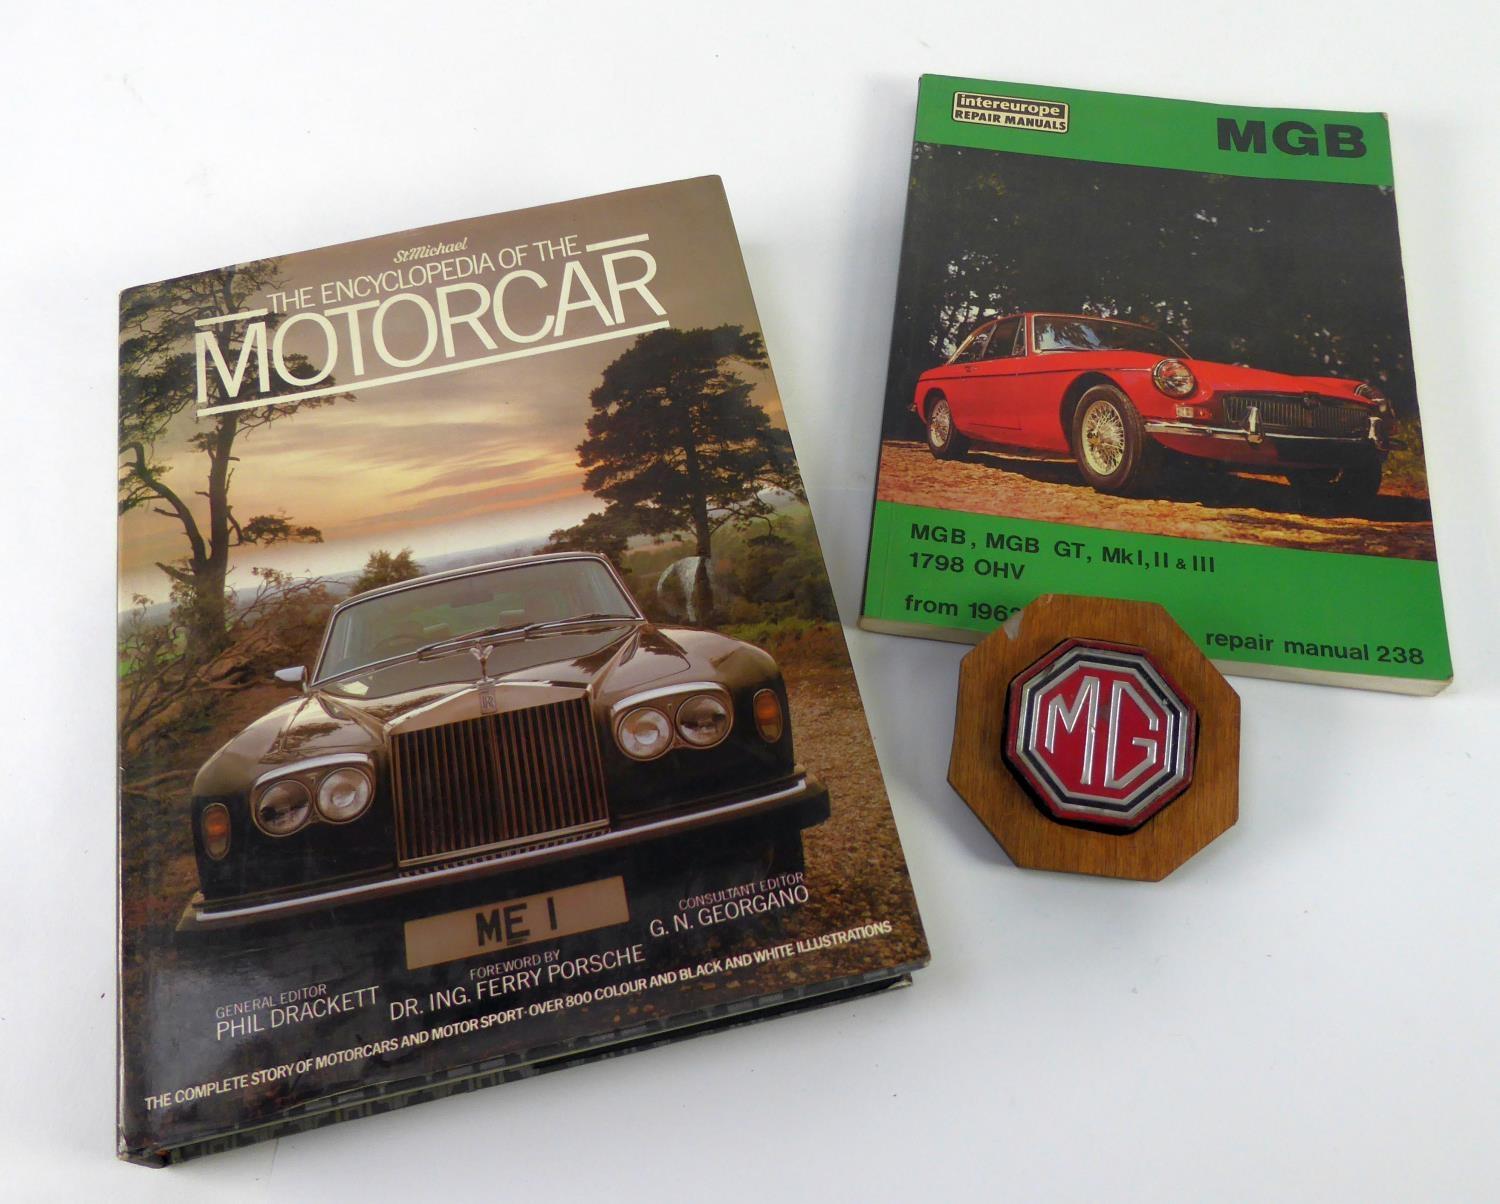 M.G. ENAMELLED MOTORCAR BADGE, octagonal, for bumper mounting, now on a wooden back board; M.G.B.